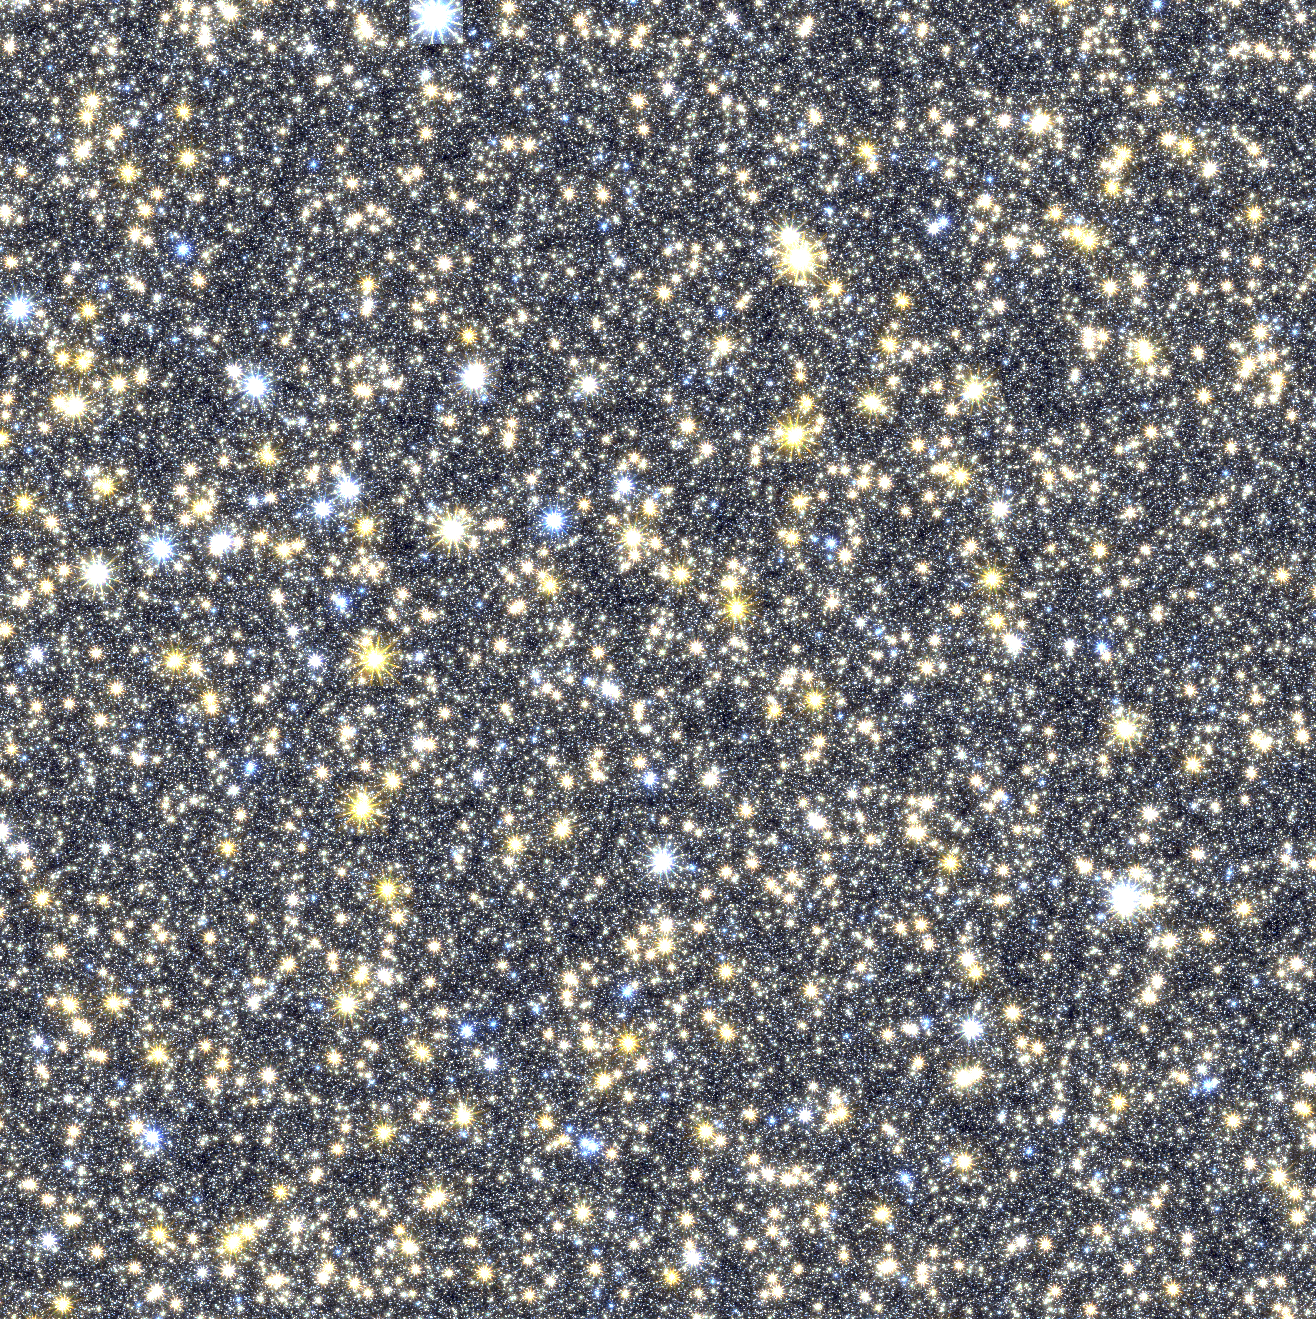 Many thousands of bright, explosive looking stars speckle the screen. The smallest ones are white pinpoints, strewn across the screen like spilled salt. Larger ones are yellow and bluish white and they have spiky outer edges like sea urchins.